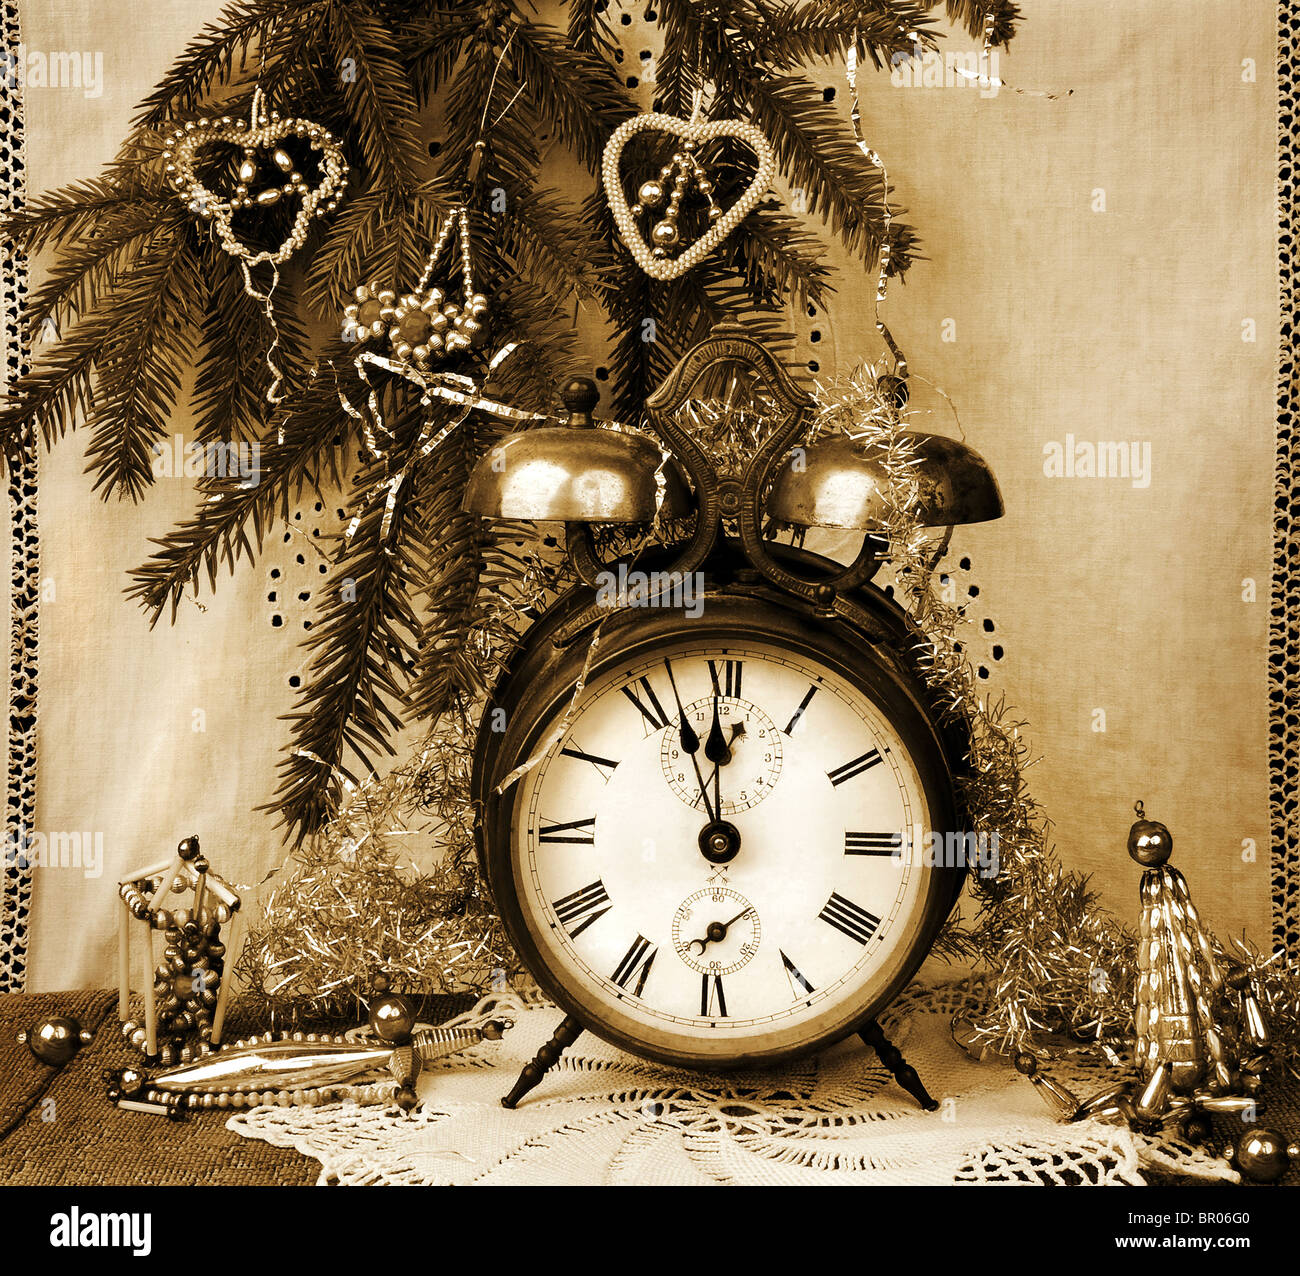 Vintage New Year still life in sepia tone Stock Photo - Alamy